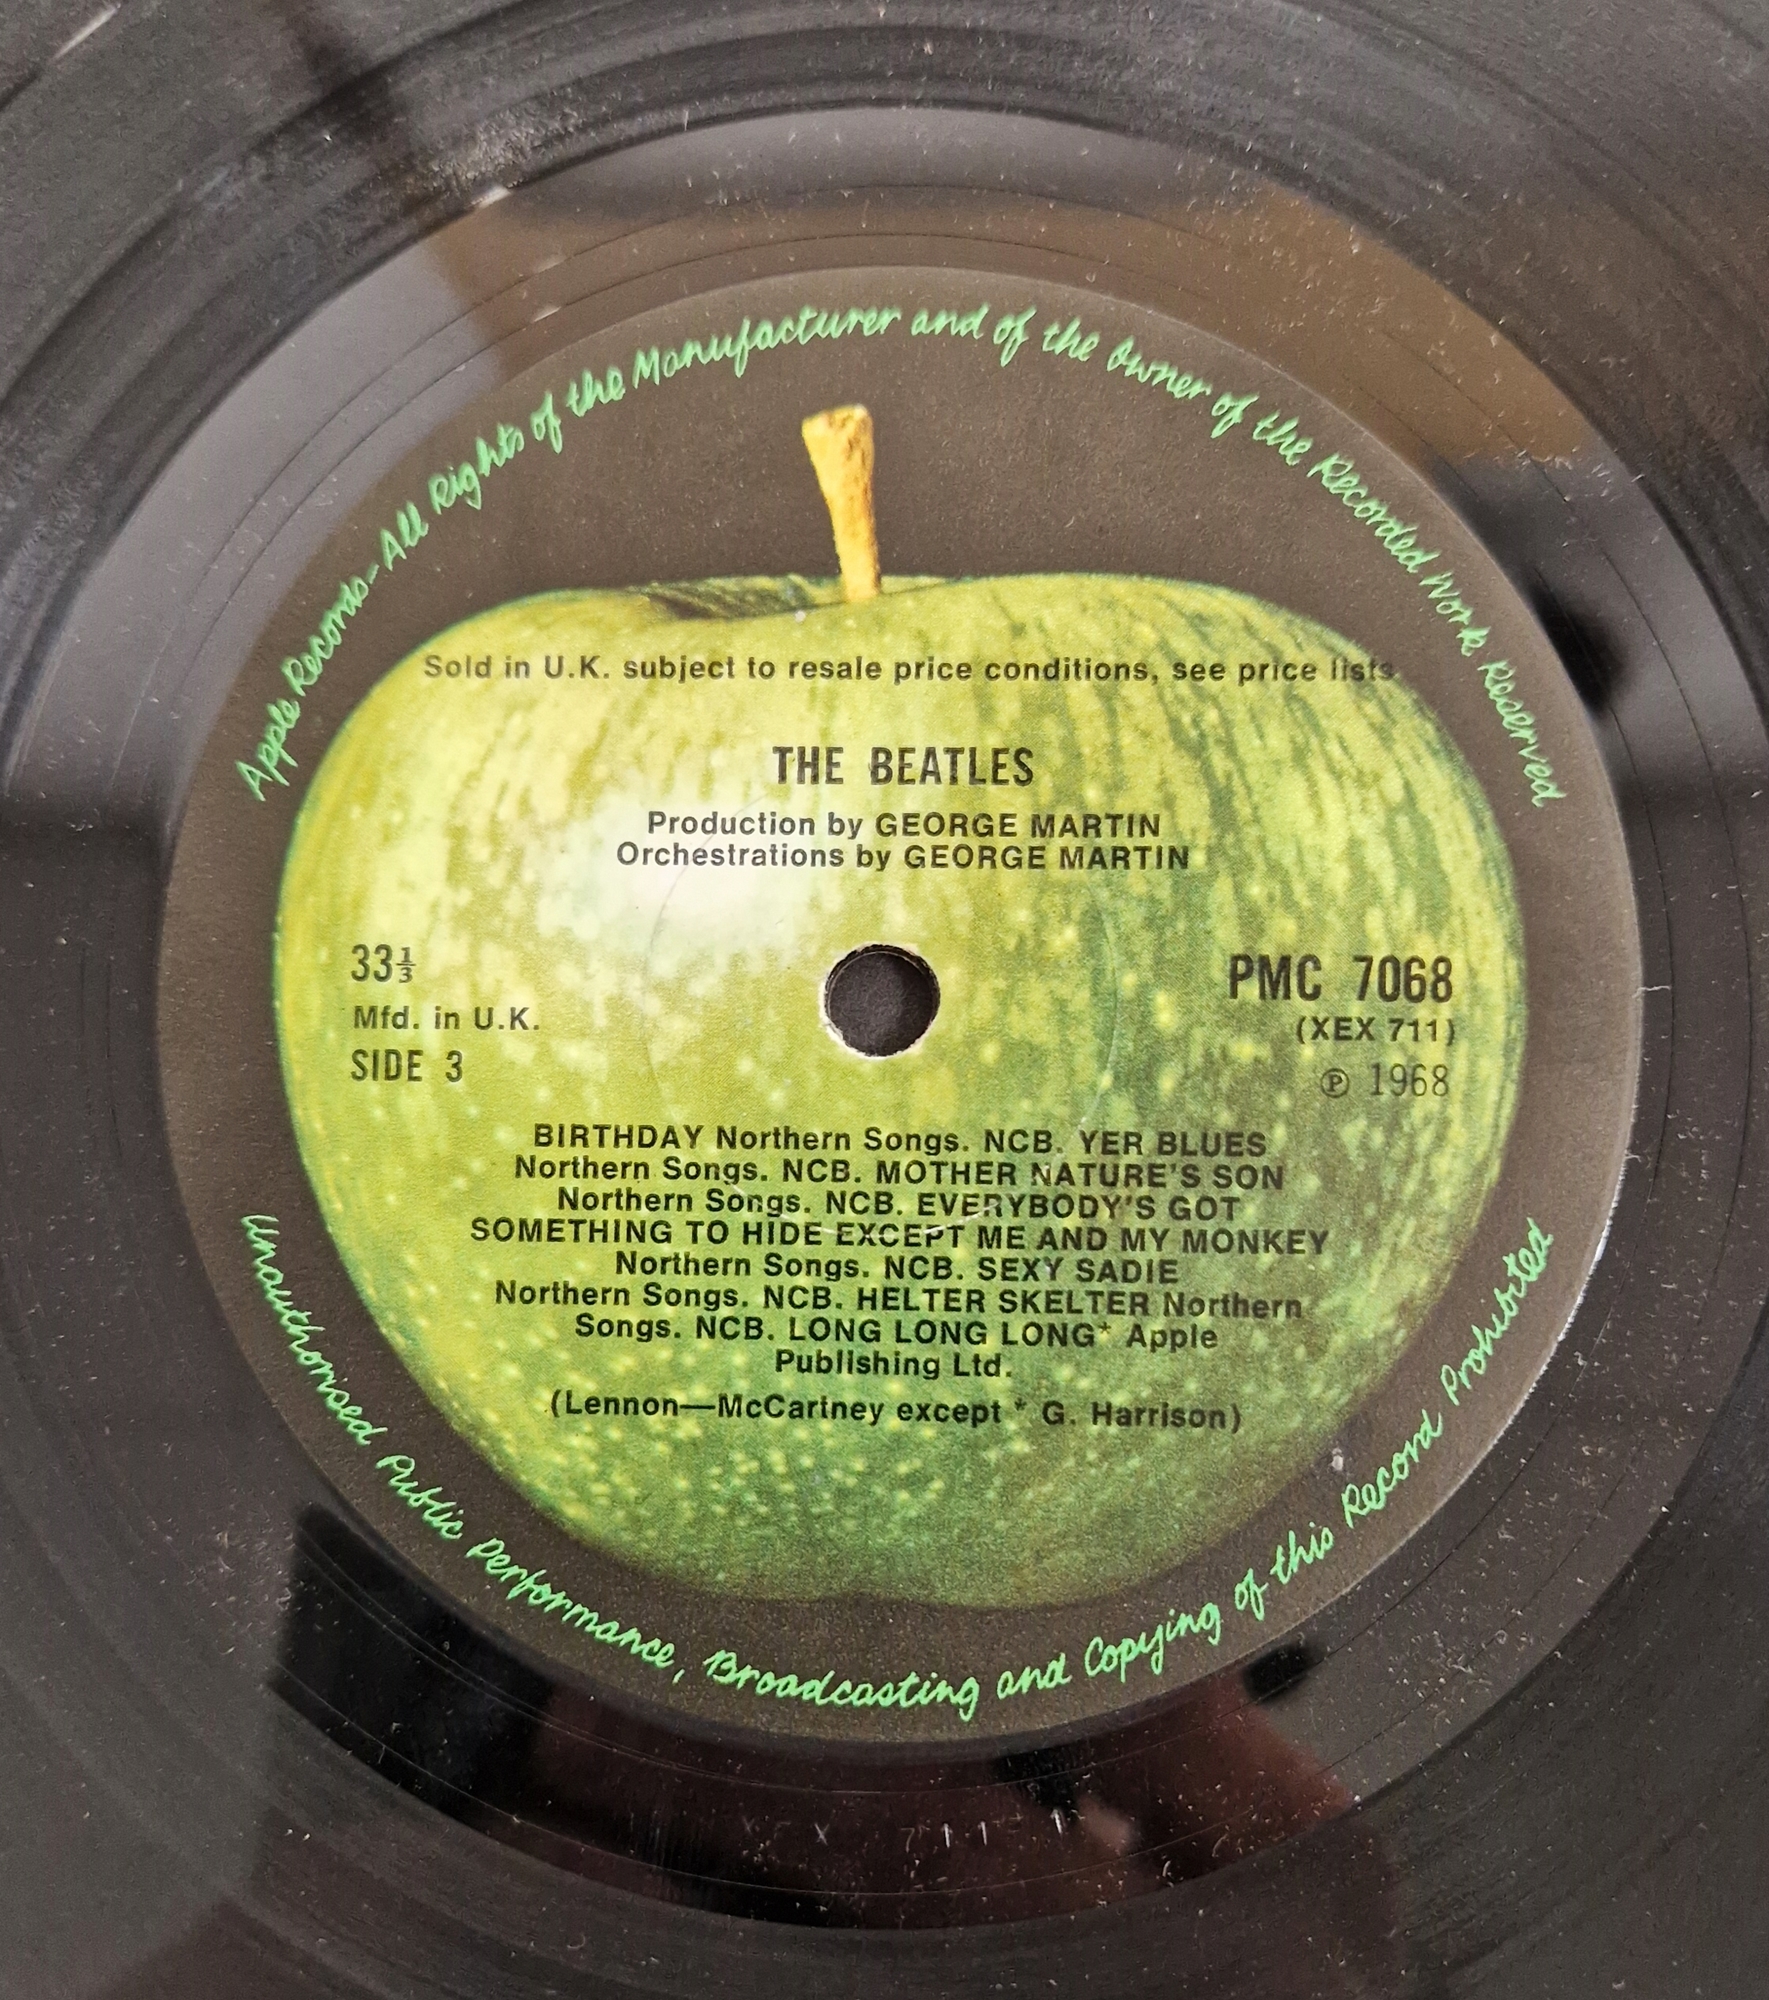 The Beatles, The Beatles (The White Album) PMC7067 (XEX-709/710/711/712-1), Misprint: does not - Image 2 of 5